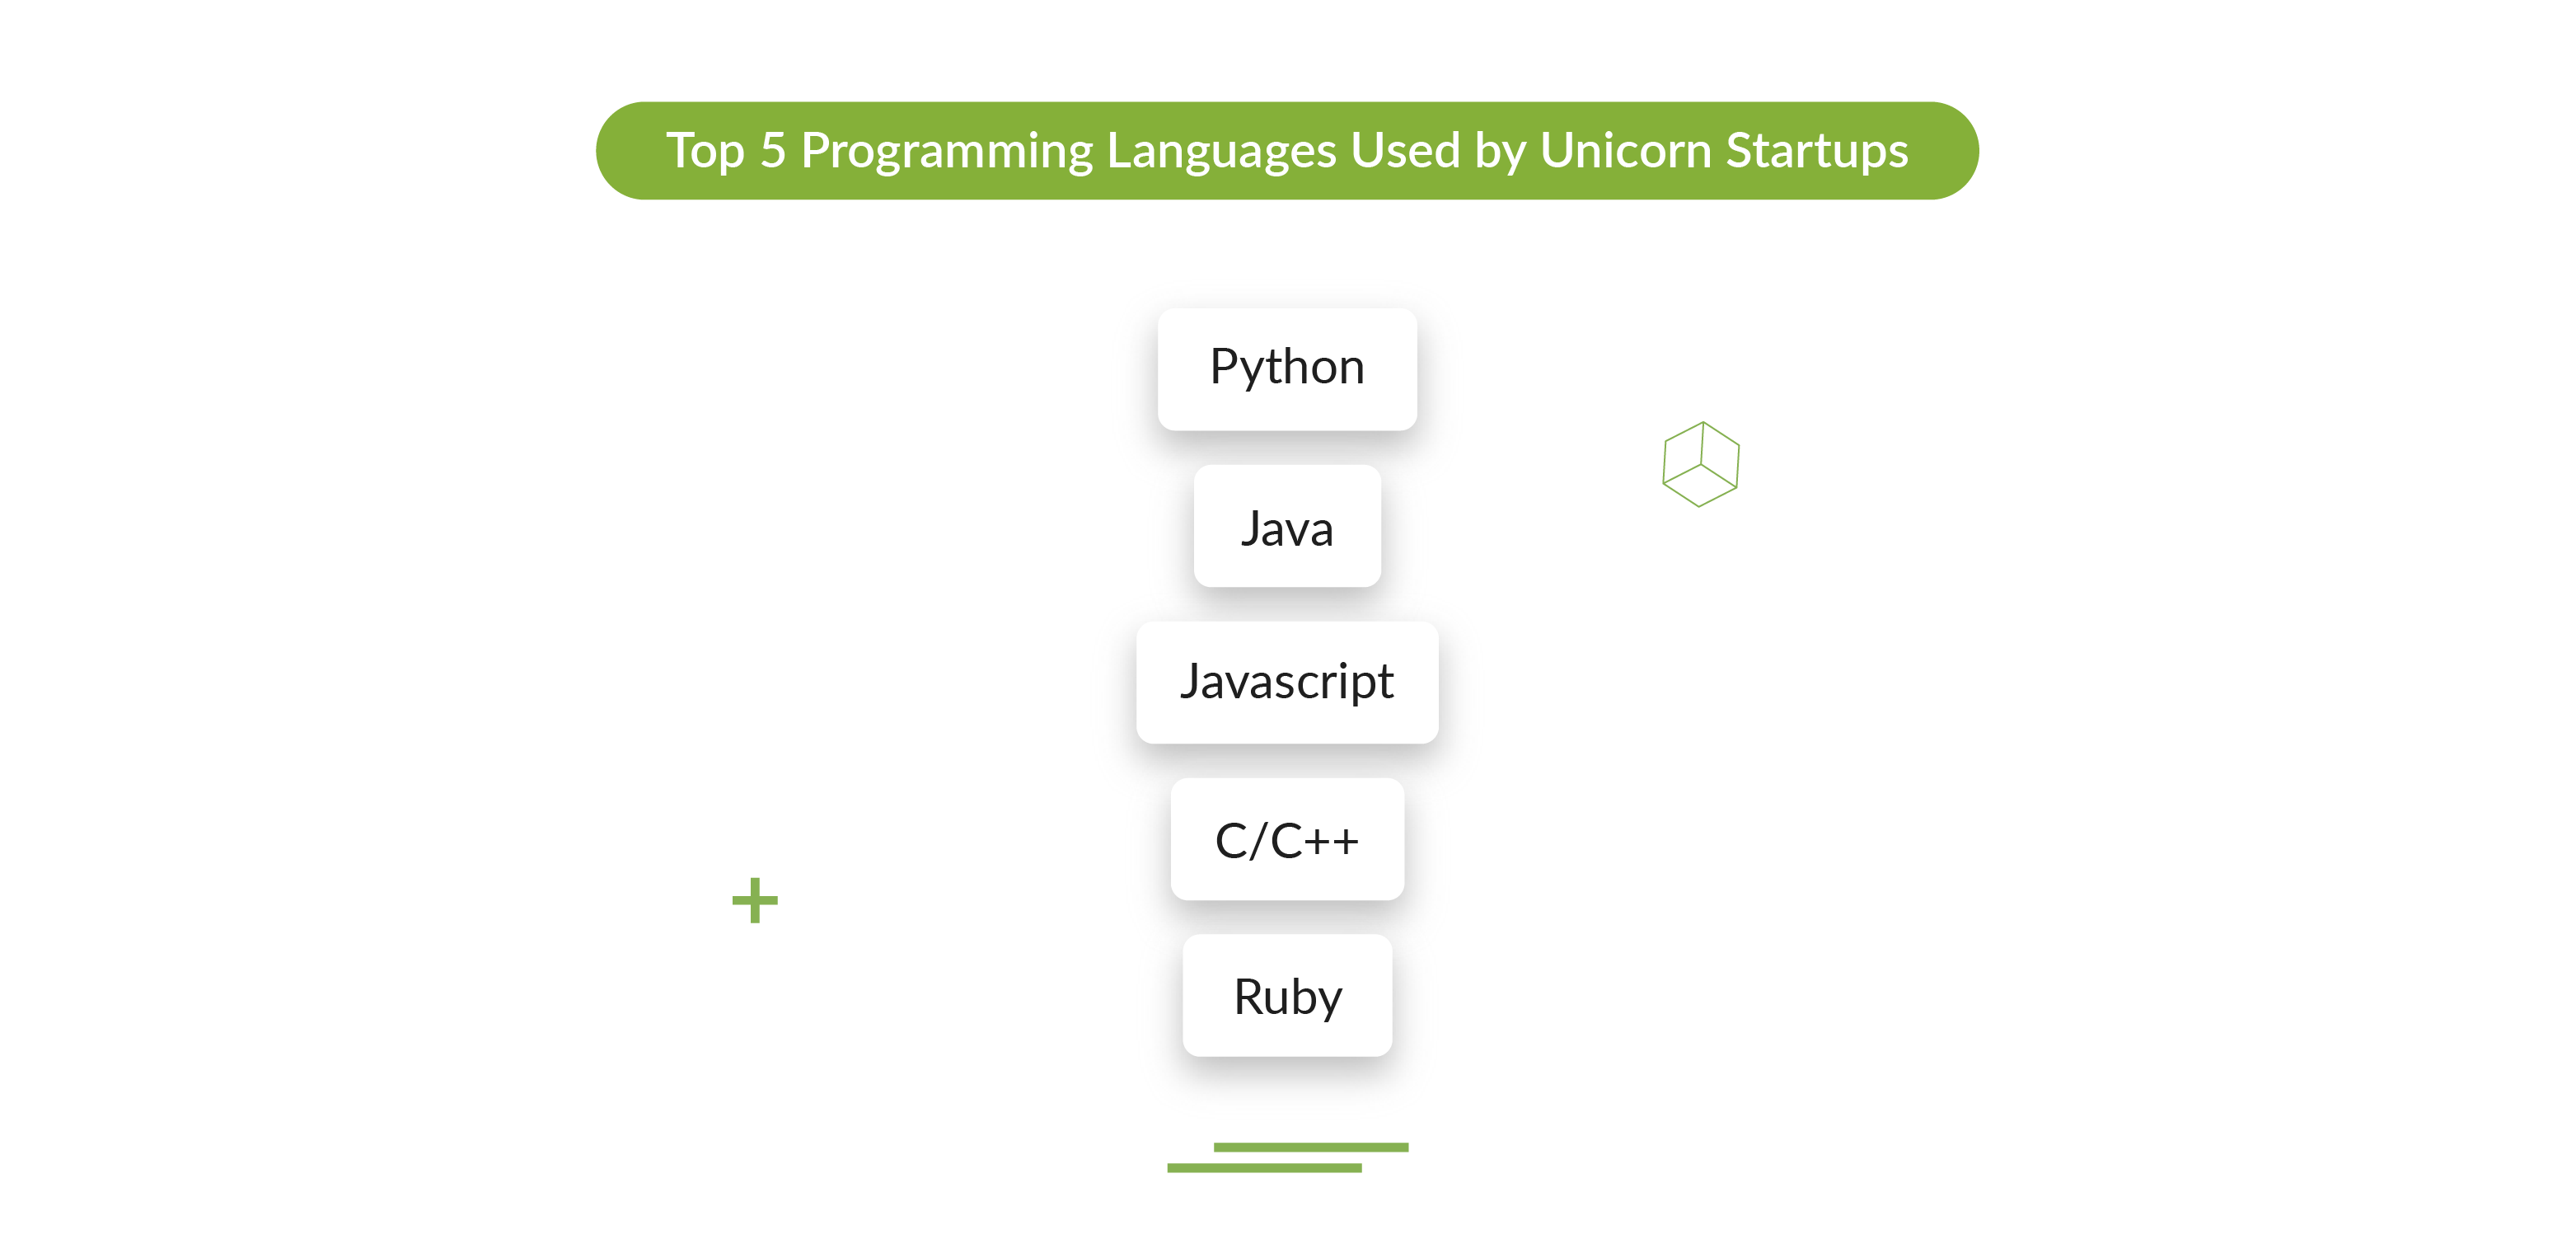 Python - The Best Language for Startup Programming 2